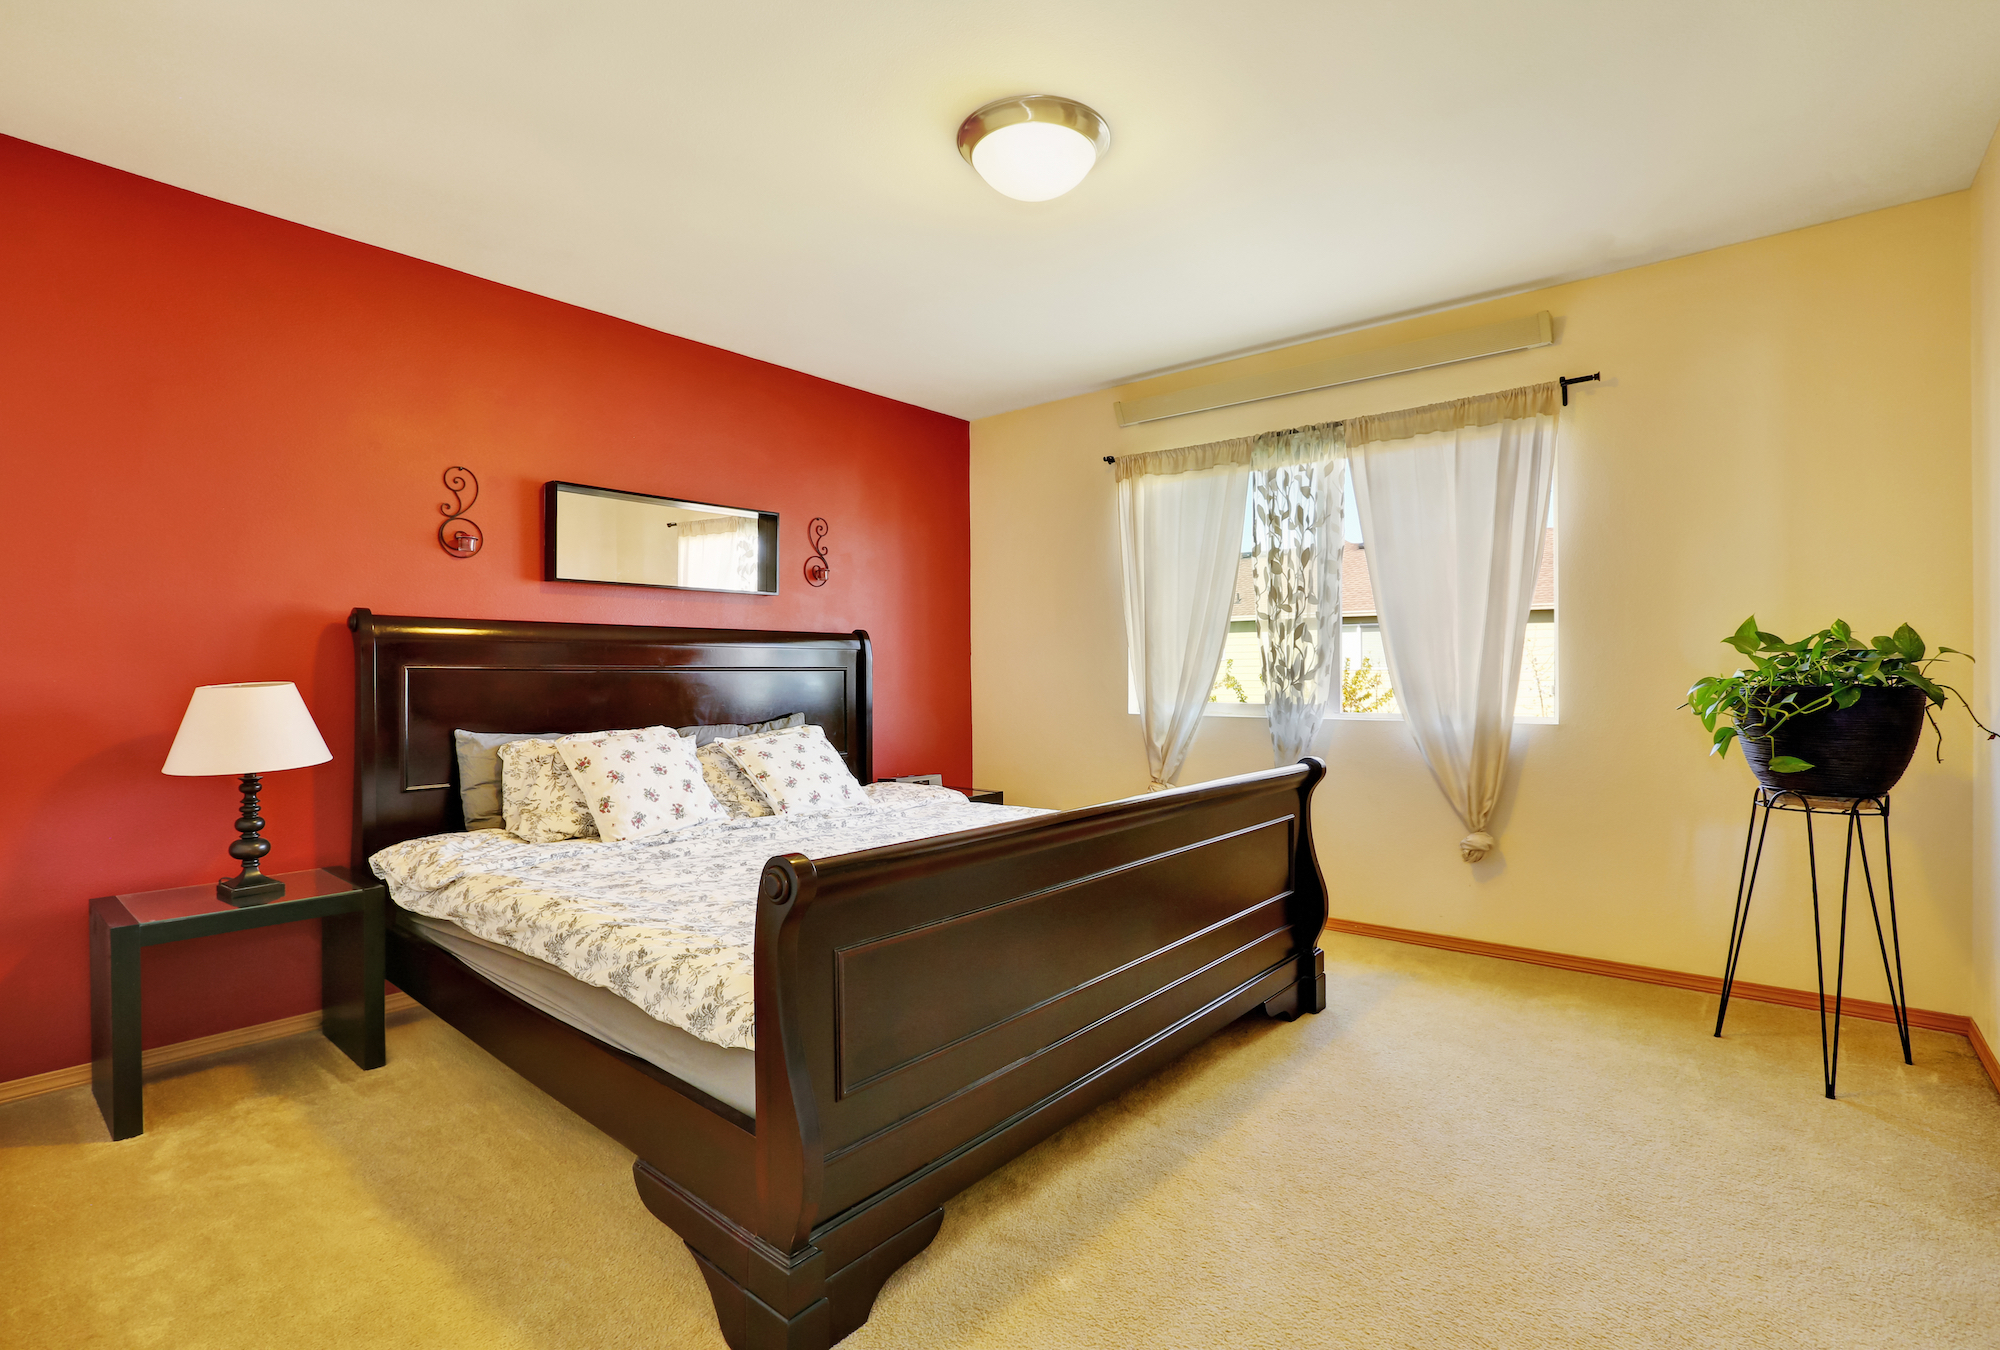 Painting Your Home 6 Romantic Master Bedroom Colors Anderson Painting Nc,How To Clean Painted Walls Before Repainting